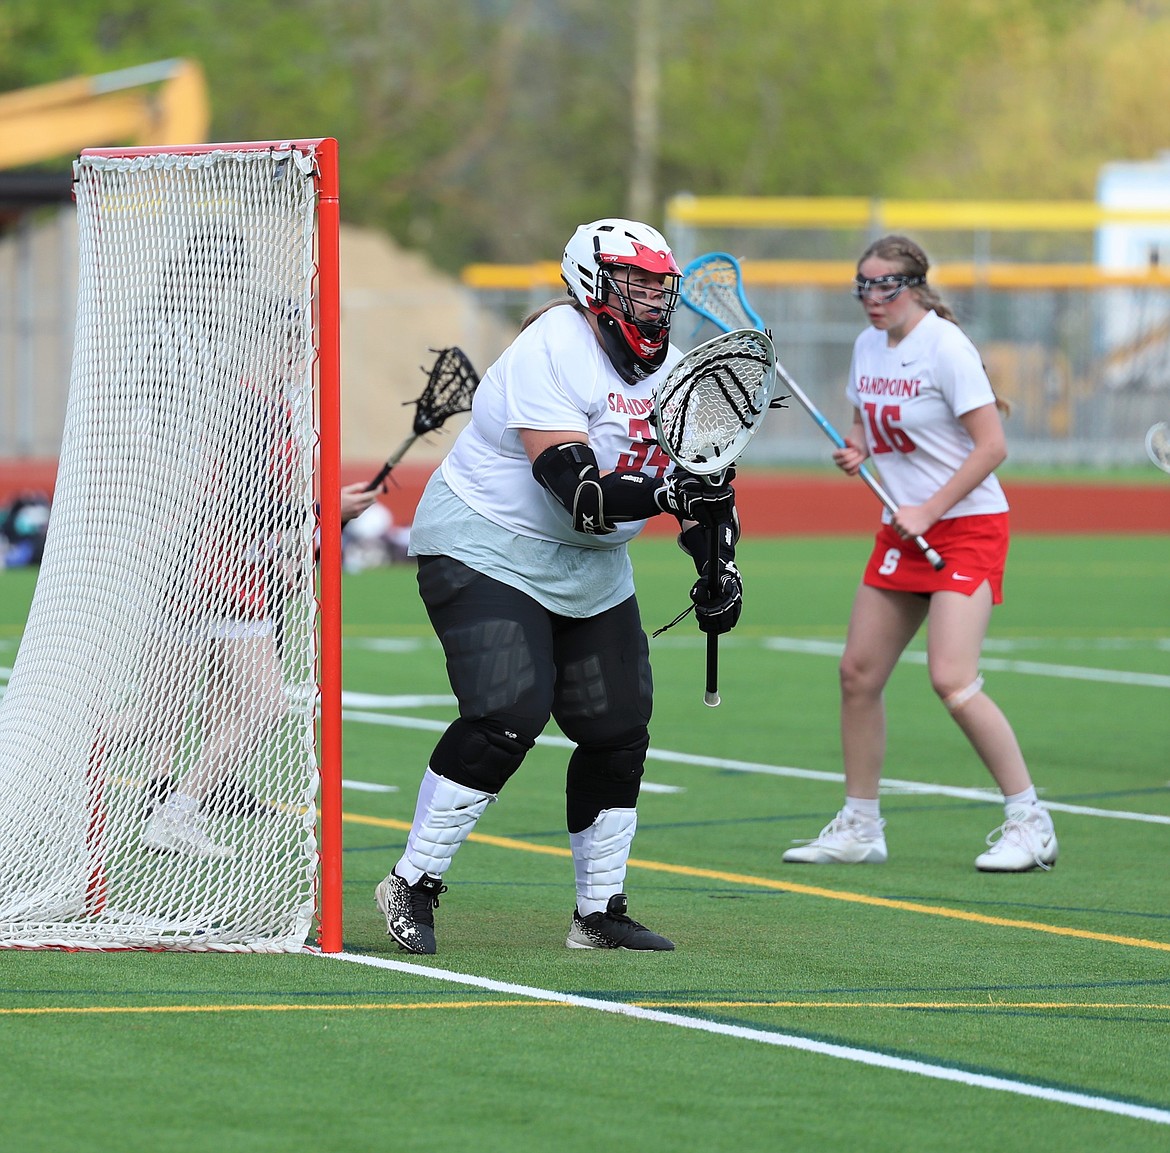 Sarah Casey stands tall in net on Saturday.